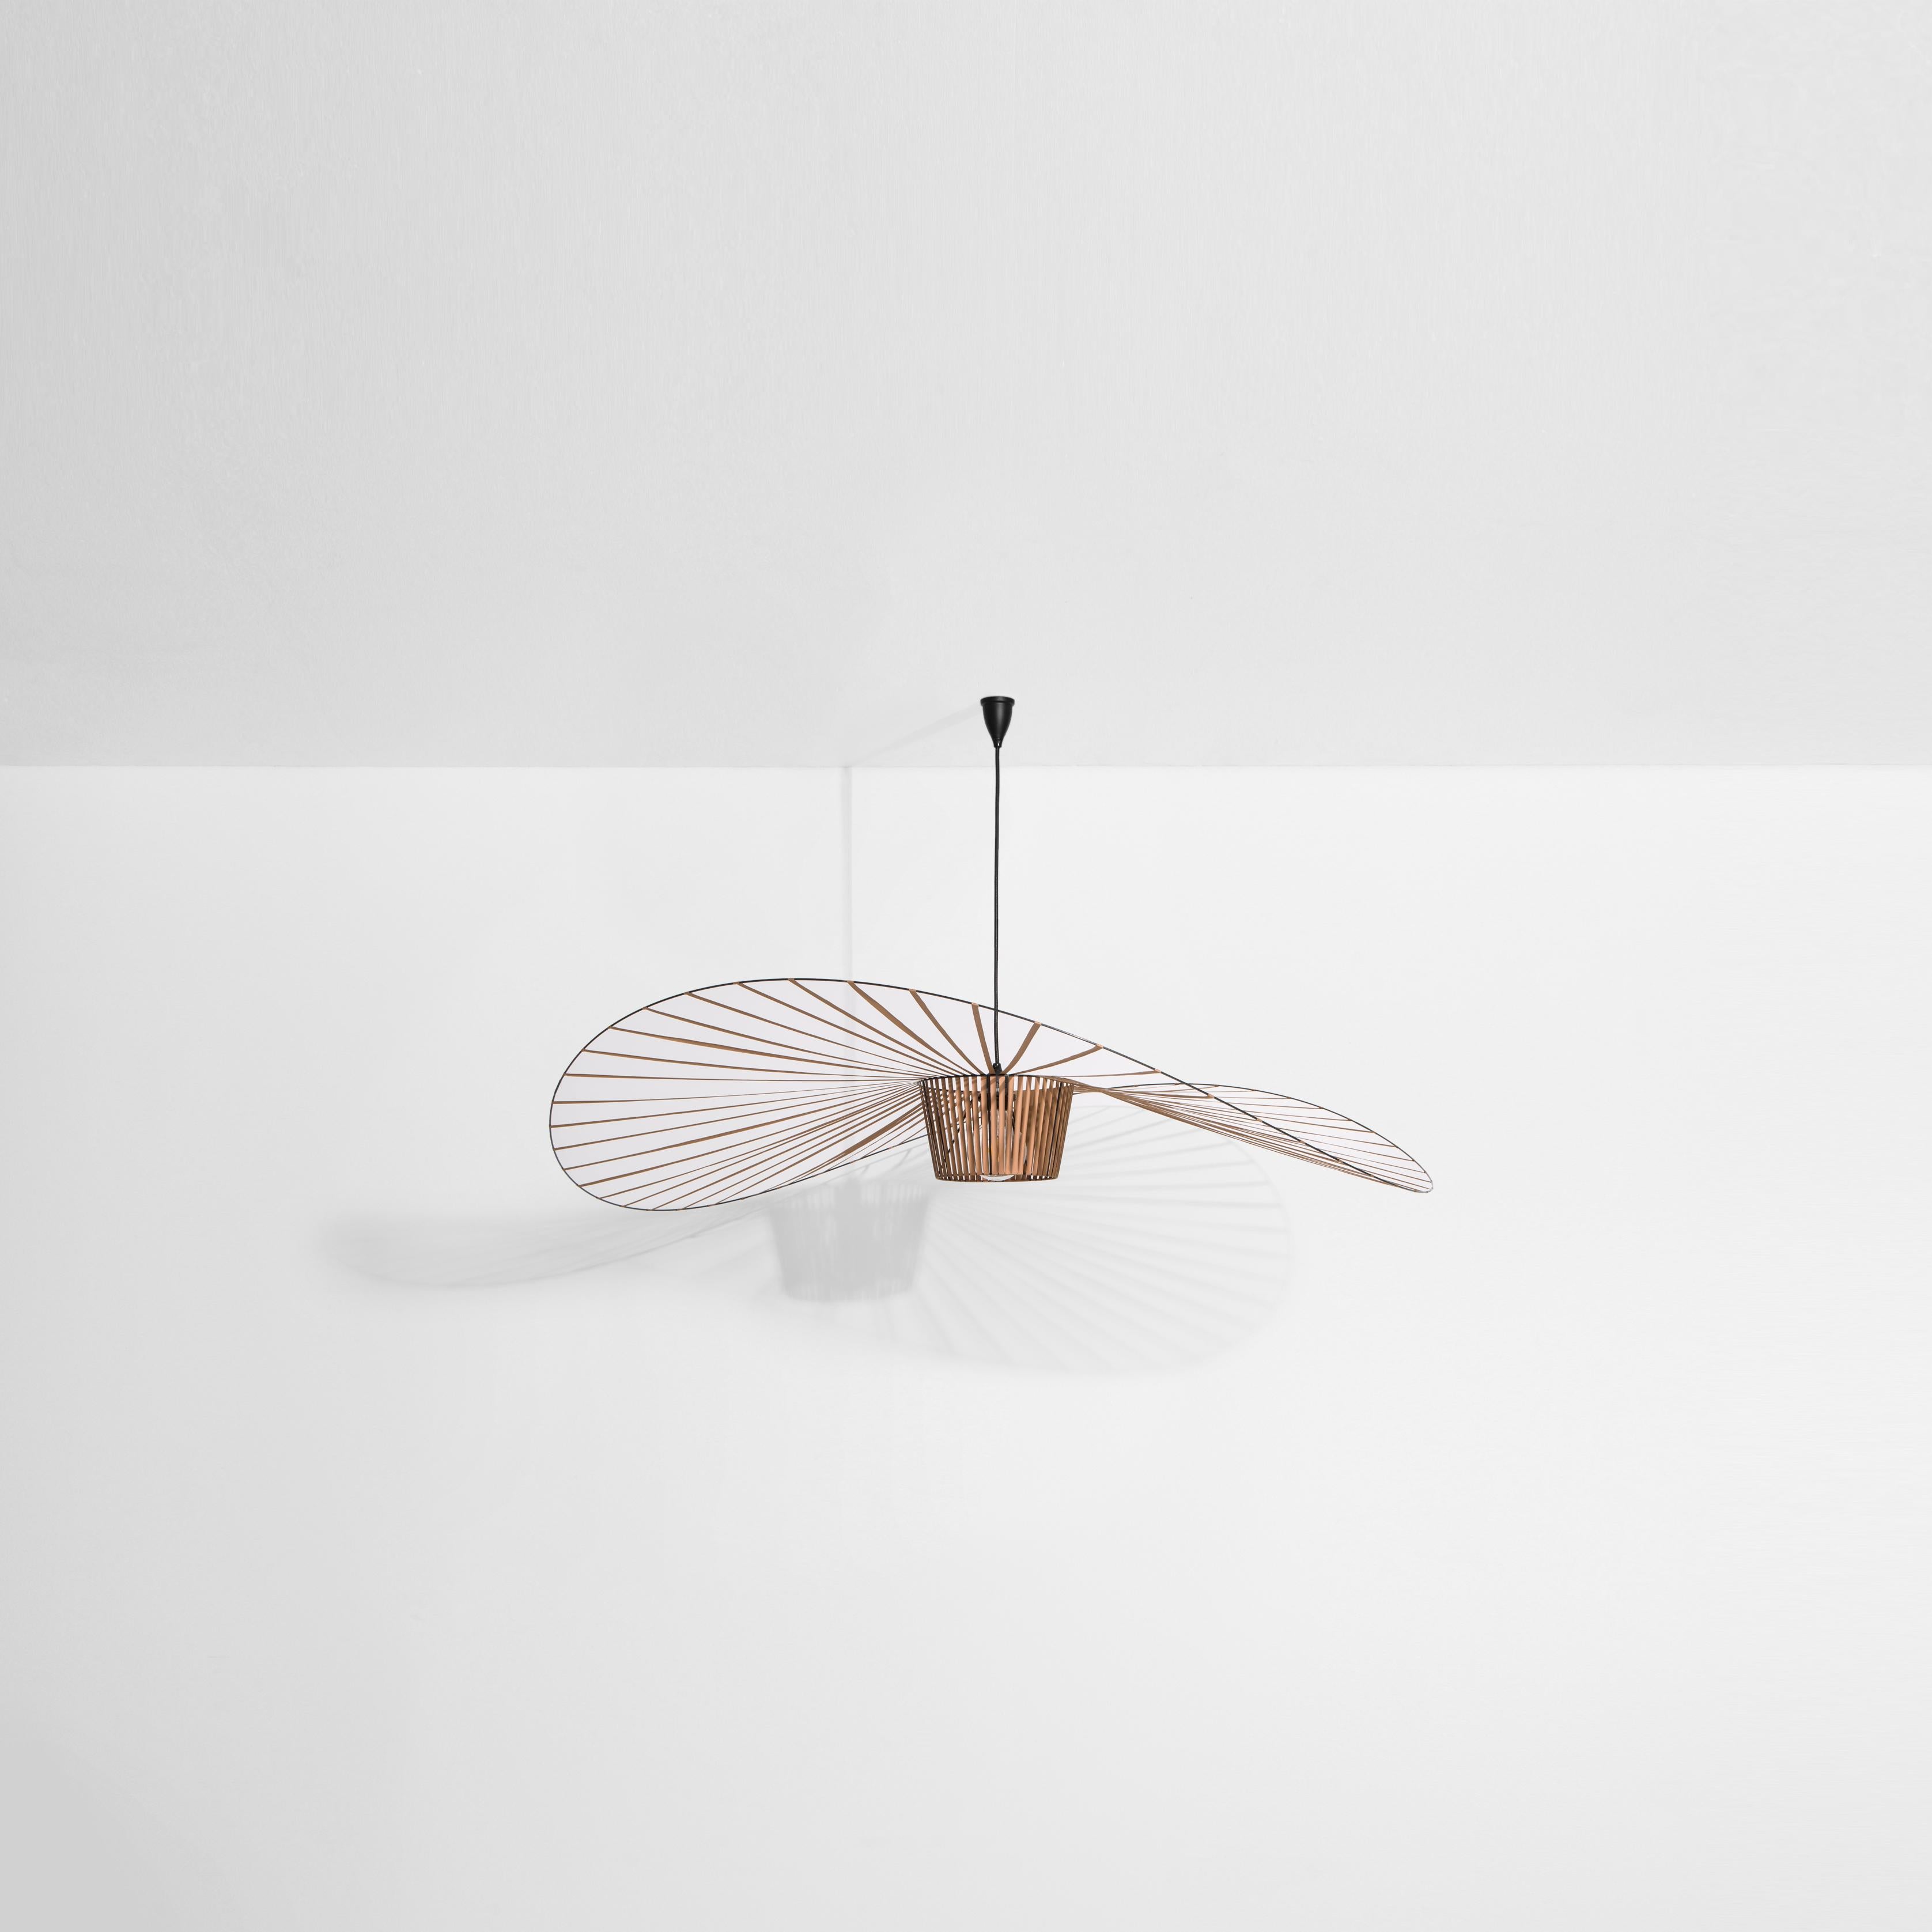 Petite Friture Medium Vertigo Pendant Light in Copper by Constance Guisset, 2010

Edited by Petite Friture in 2010, the Vertigo pendant light is now an icon of contemporary design. With its ultra-light fiberglass structure, stretched with velvety